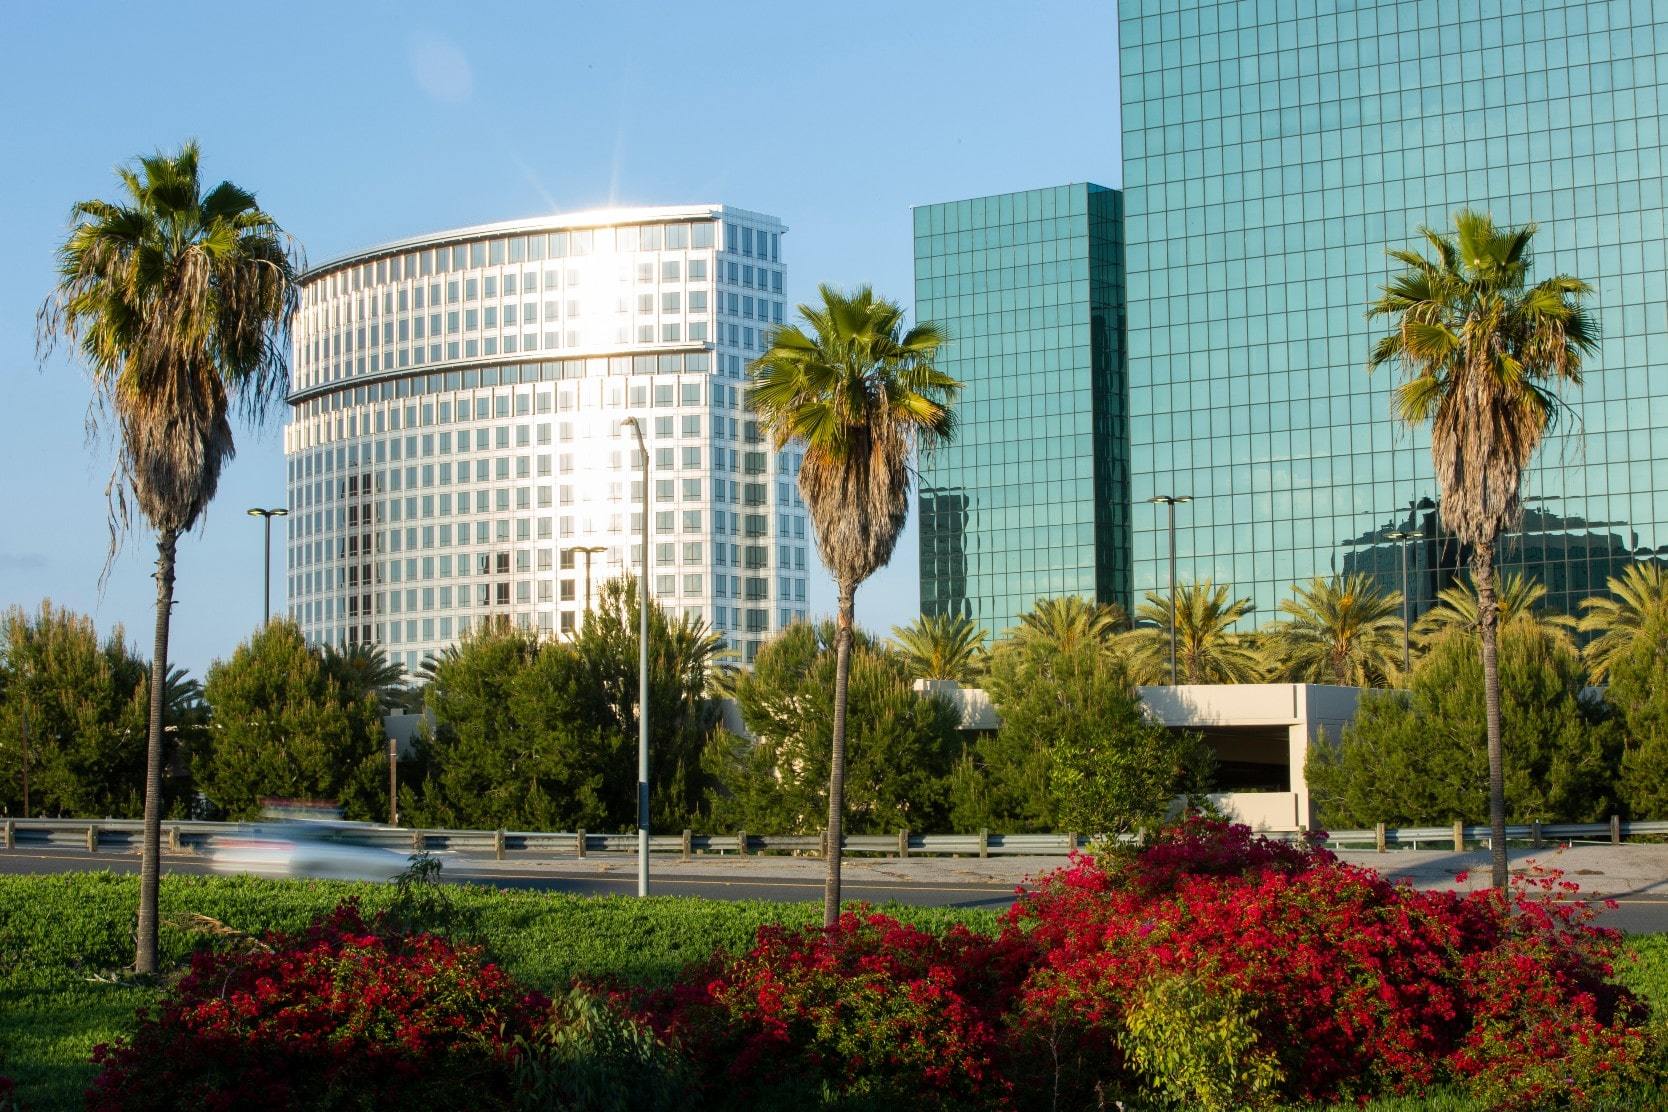 Modern buildings and palm trees in Costa Mesa, Orange County, California